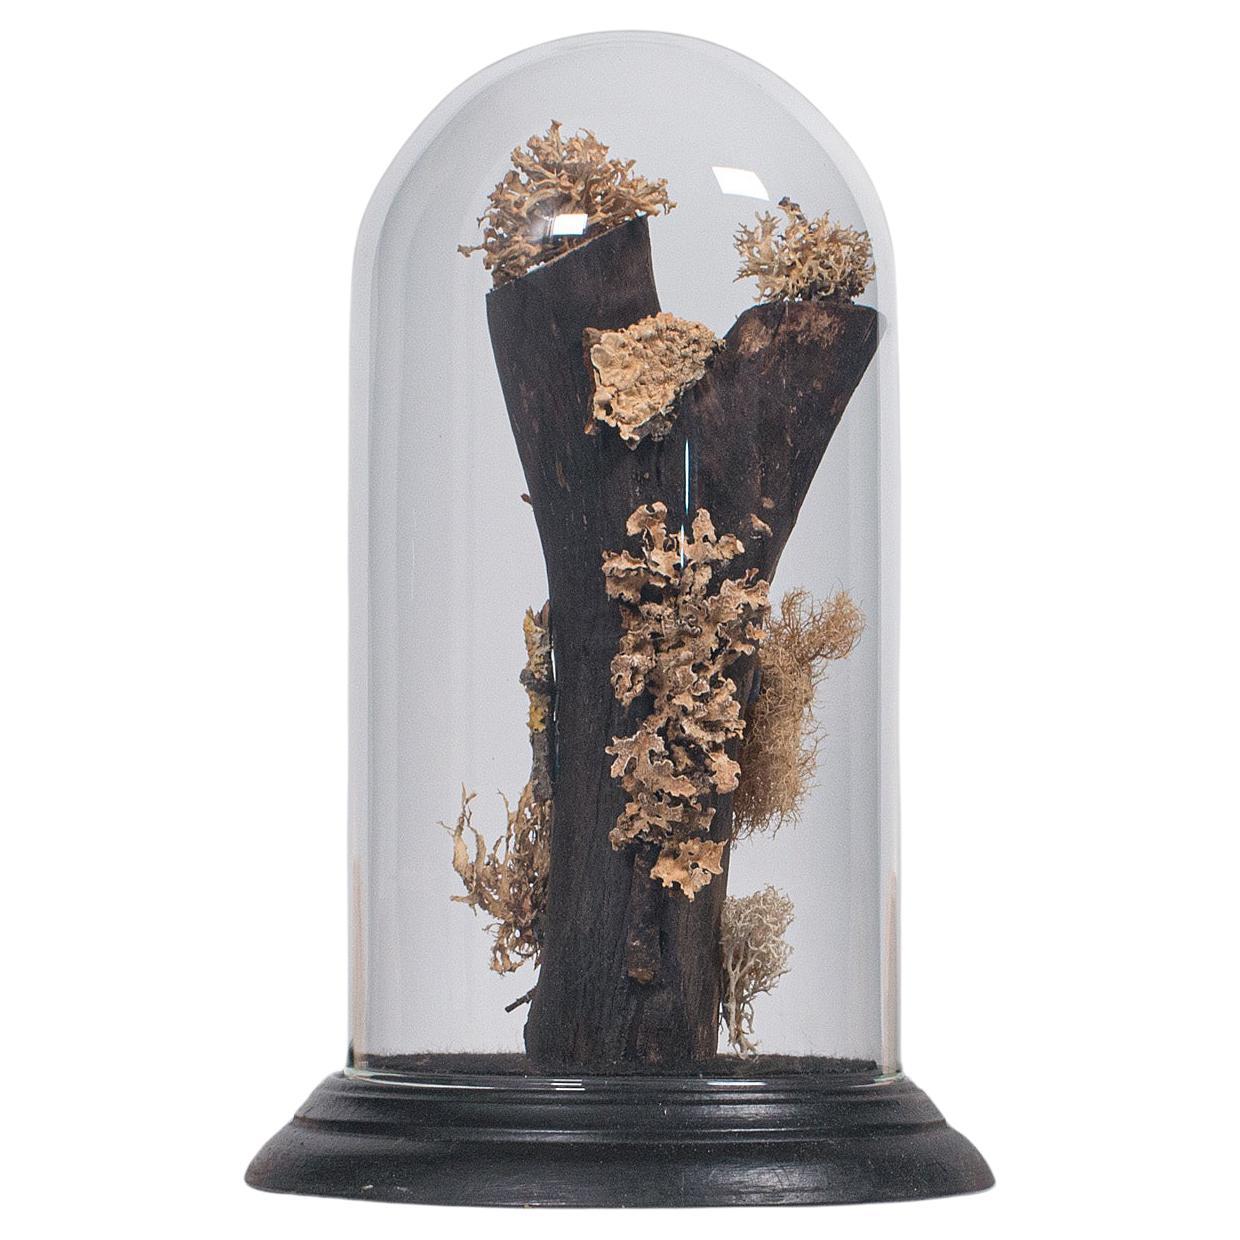 Vintage Taxidermy Display Dome, Glass, Specimen, Moss, Lichen, Late 20th Century